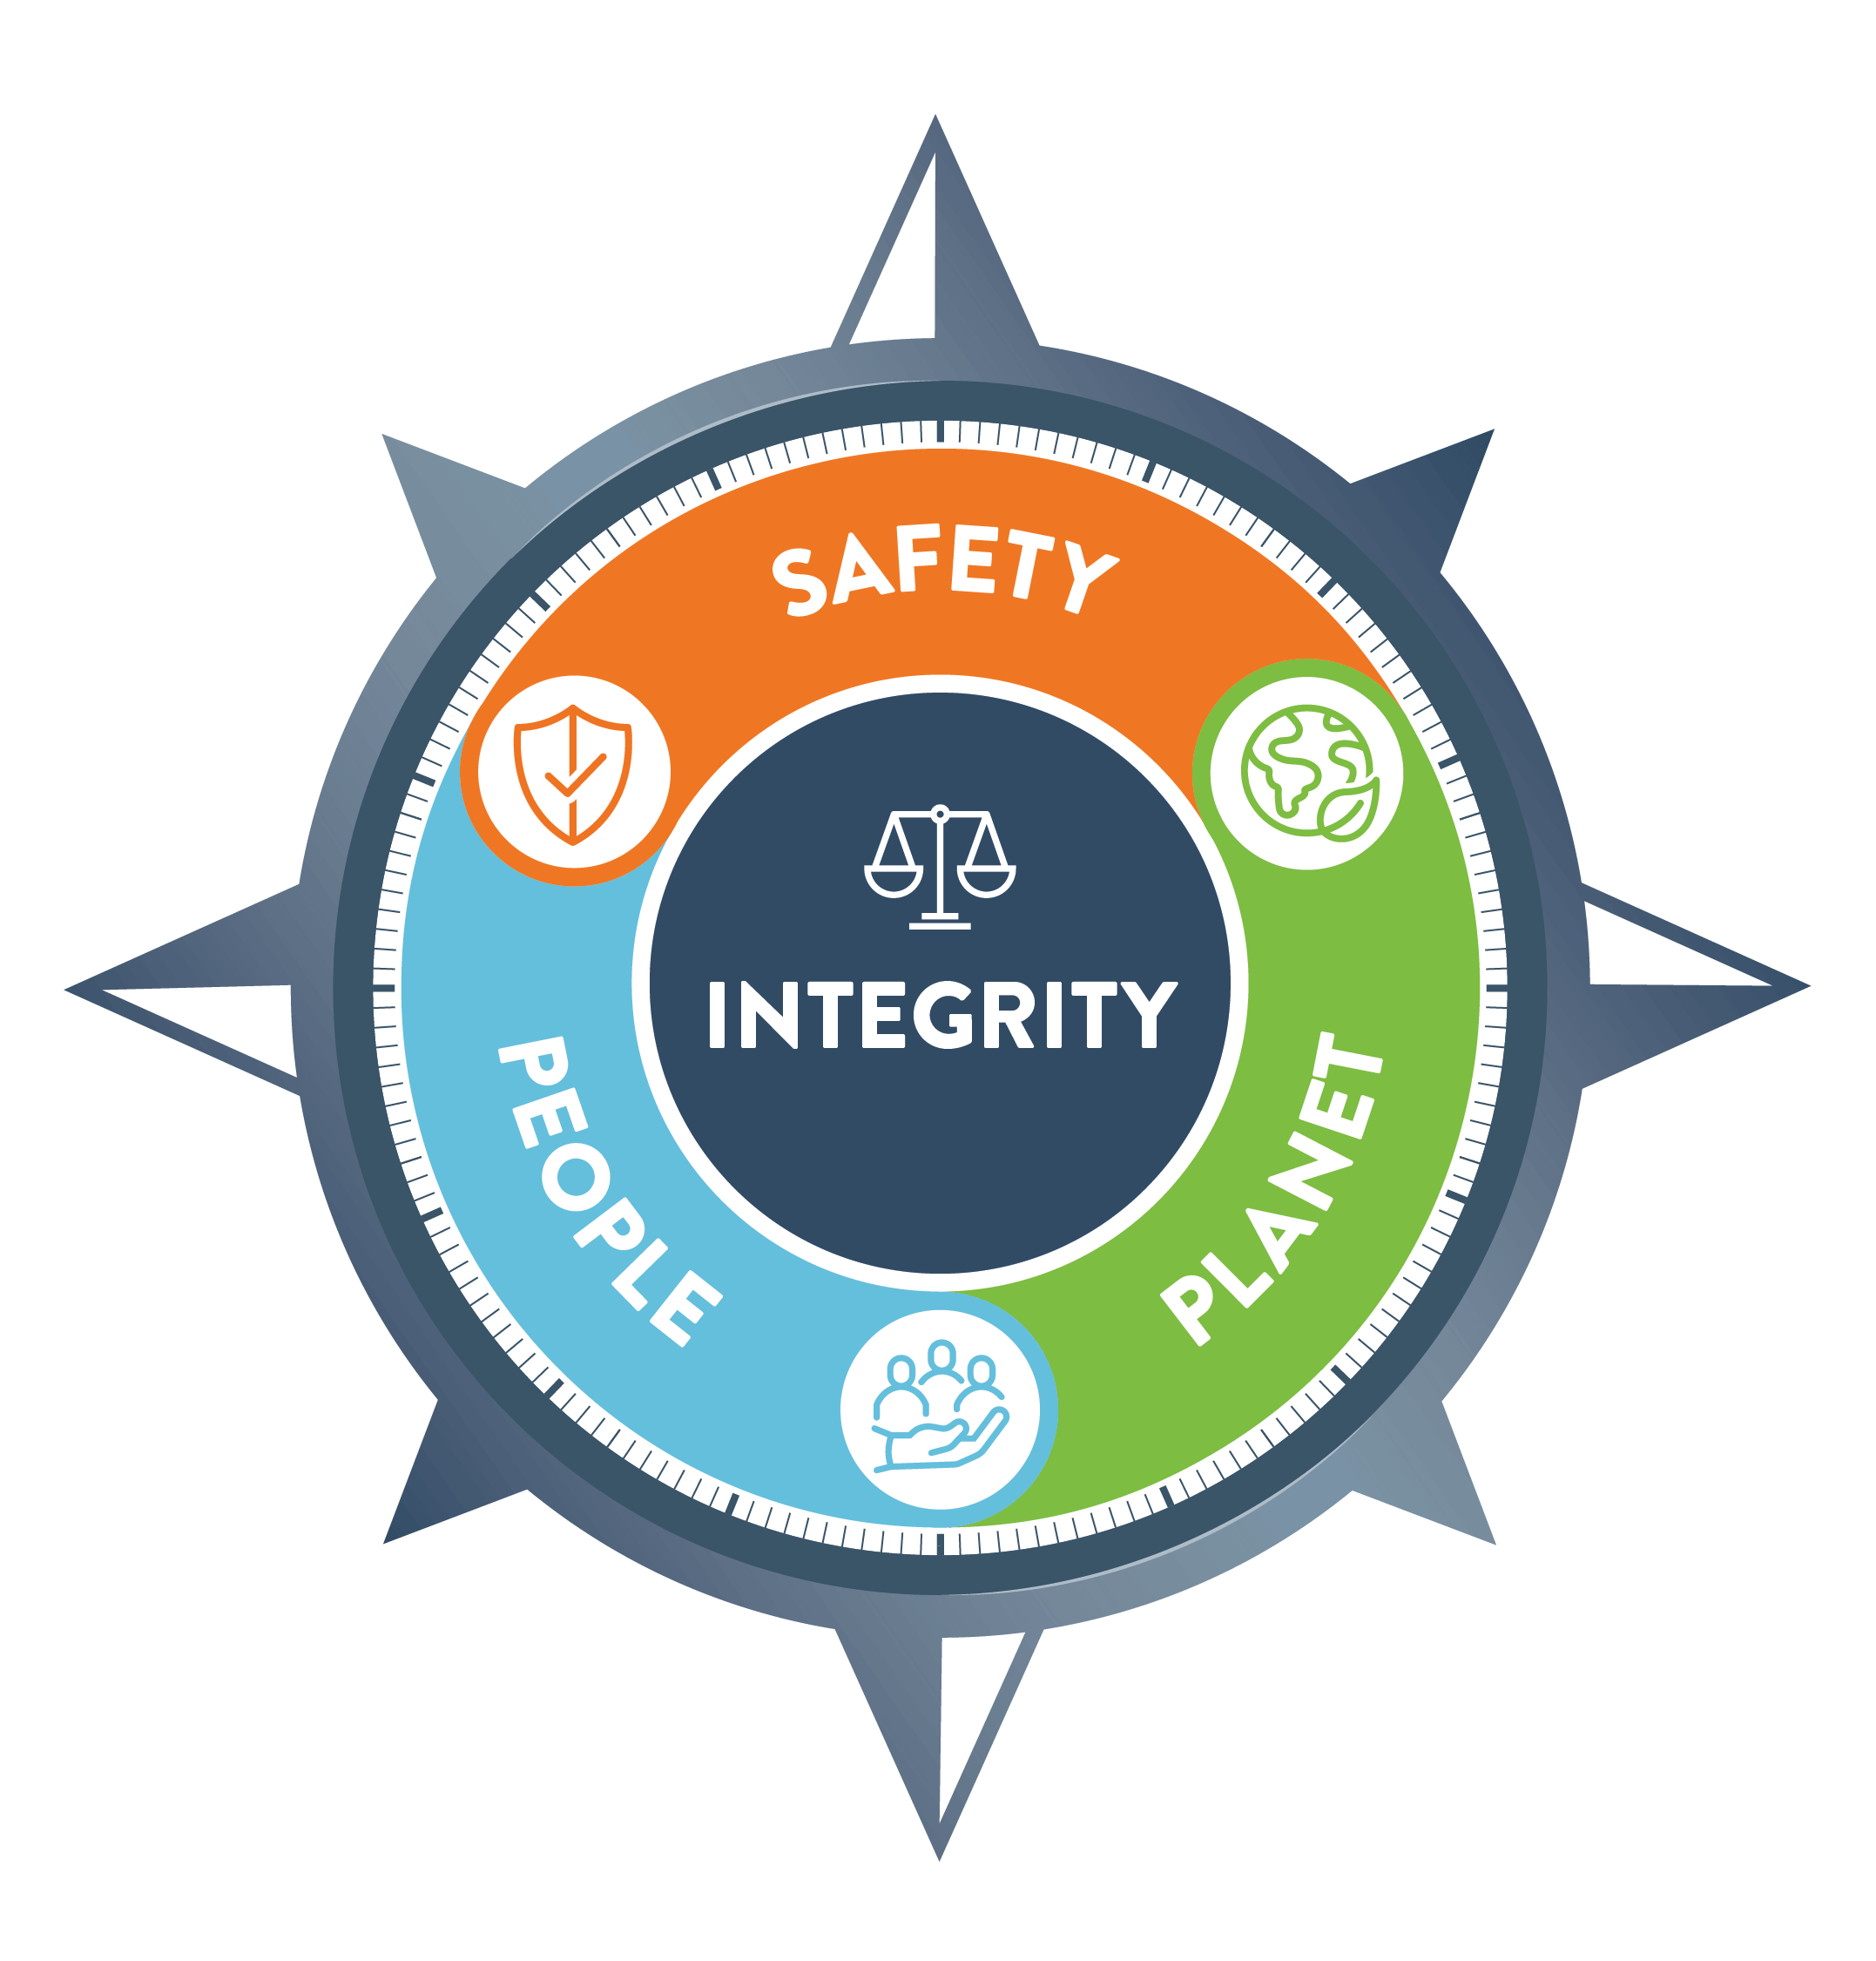 Shared Values: Integrity, Safety, People, Planet